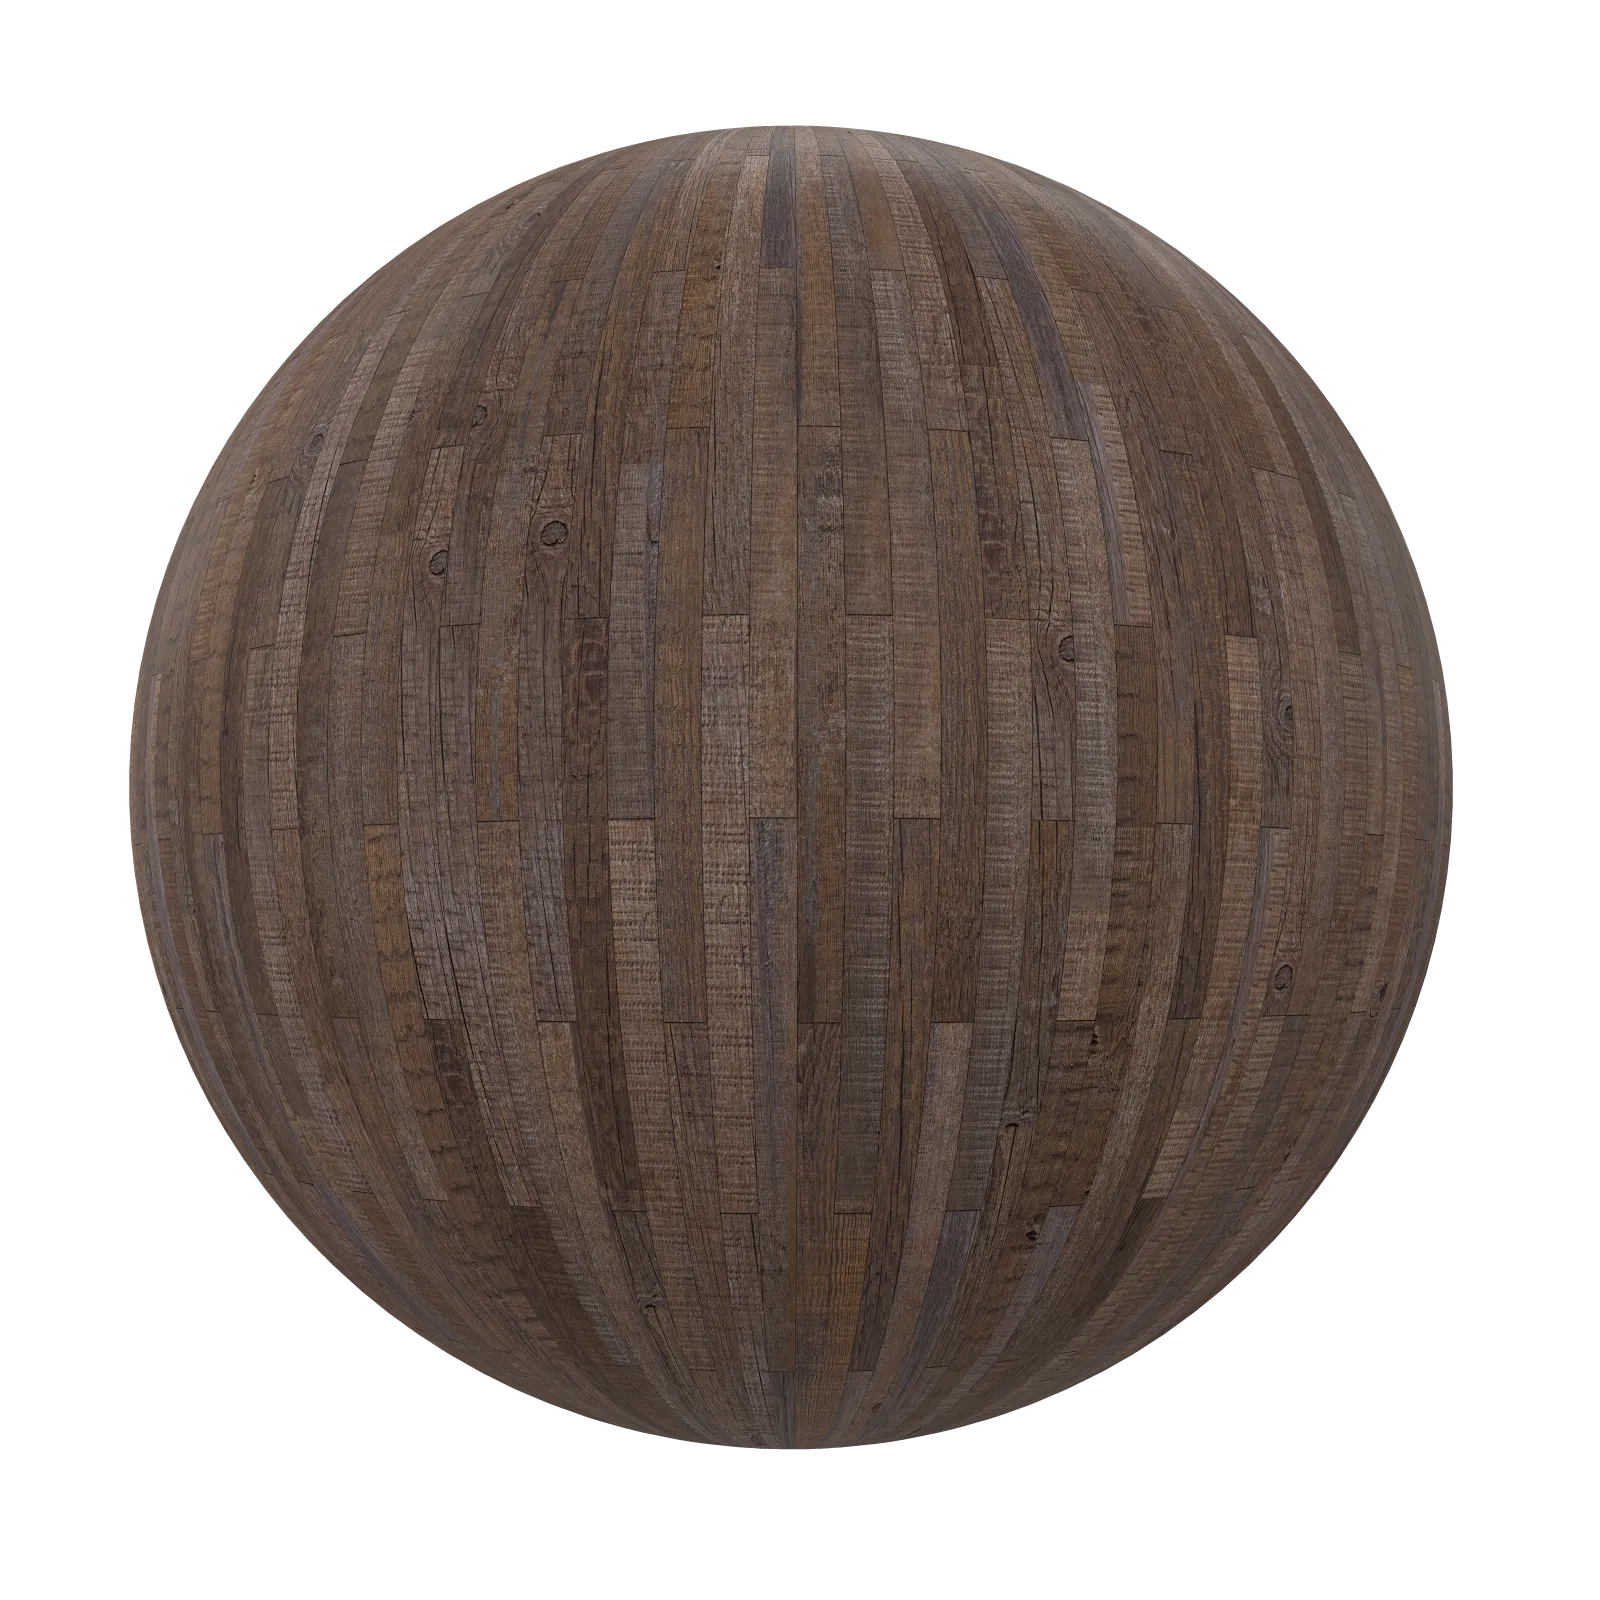 TEXTURES – WOOD – Old Wood Tiles 23